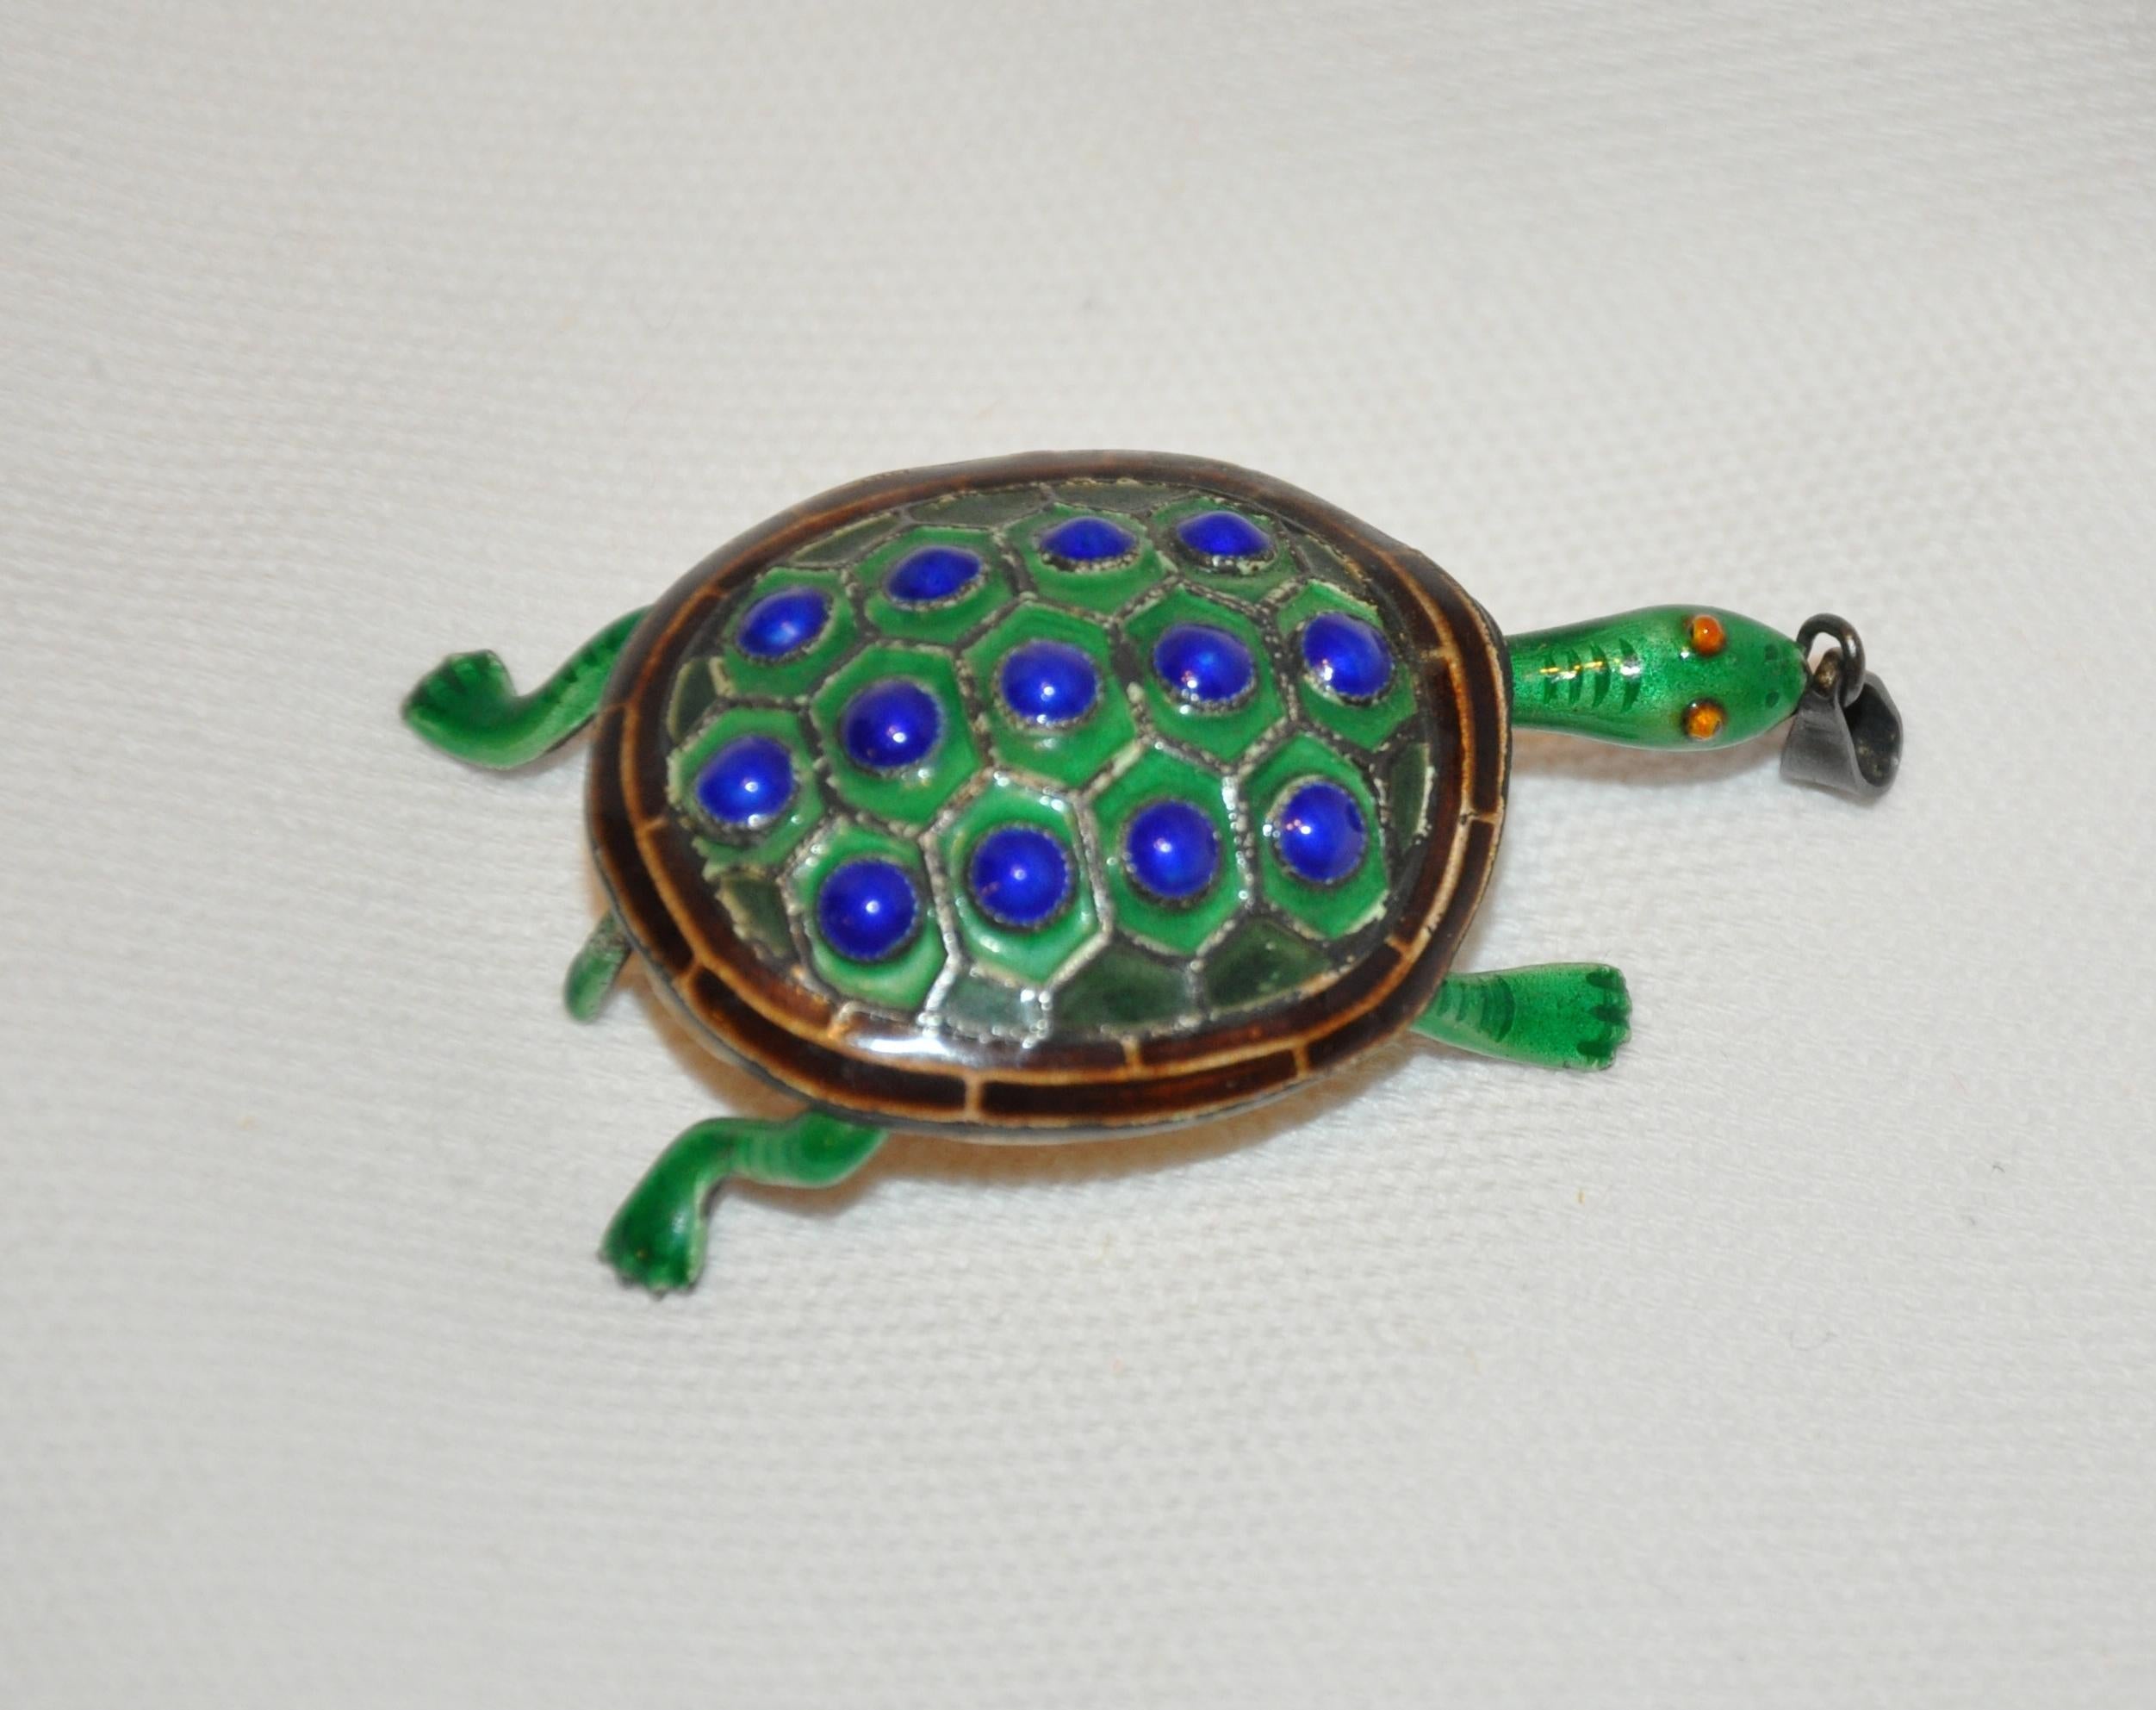      Whimsical silver-based inlay with lapis-blue & sea-green baked enamel 